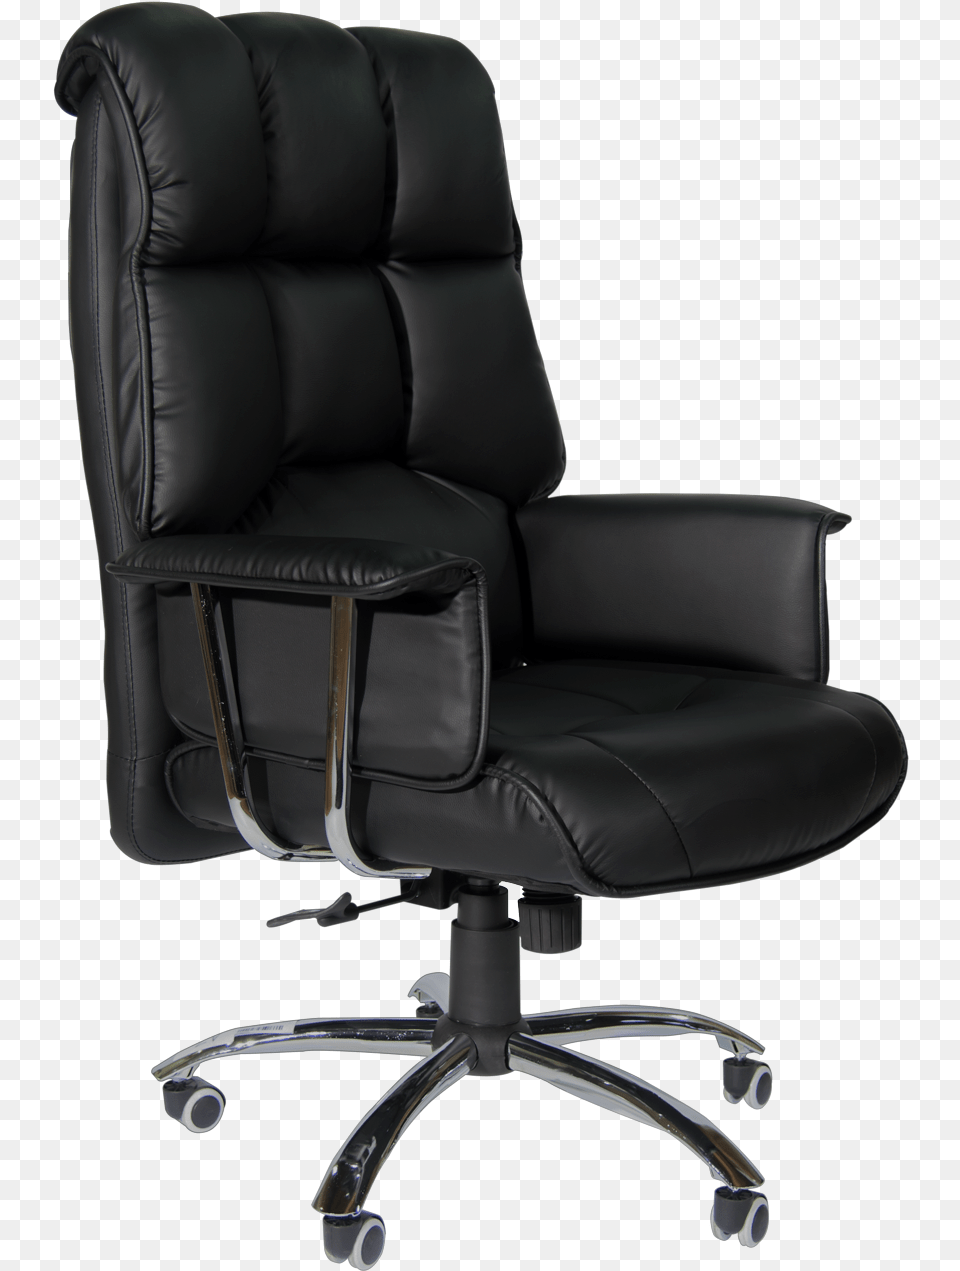 Boss Chair For Office, Cushion, Furniture, Home Decor, Armchair Png